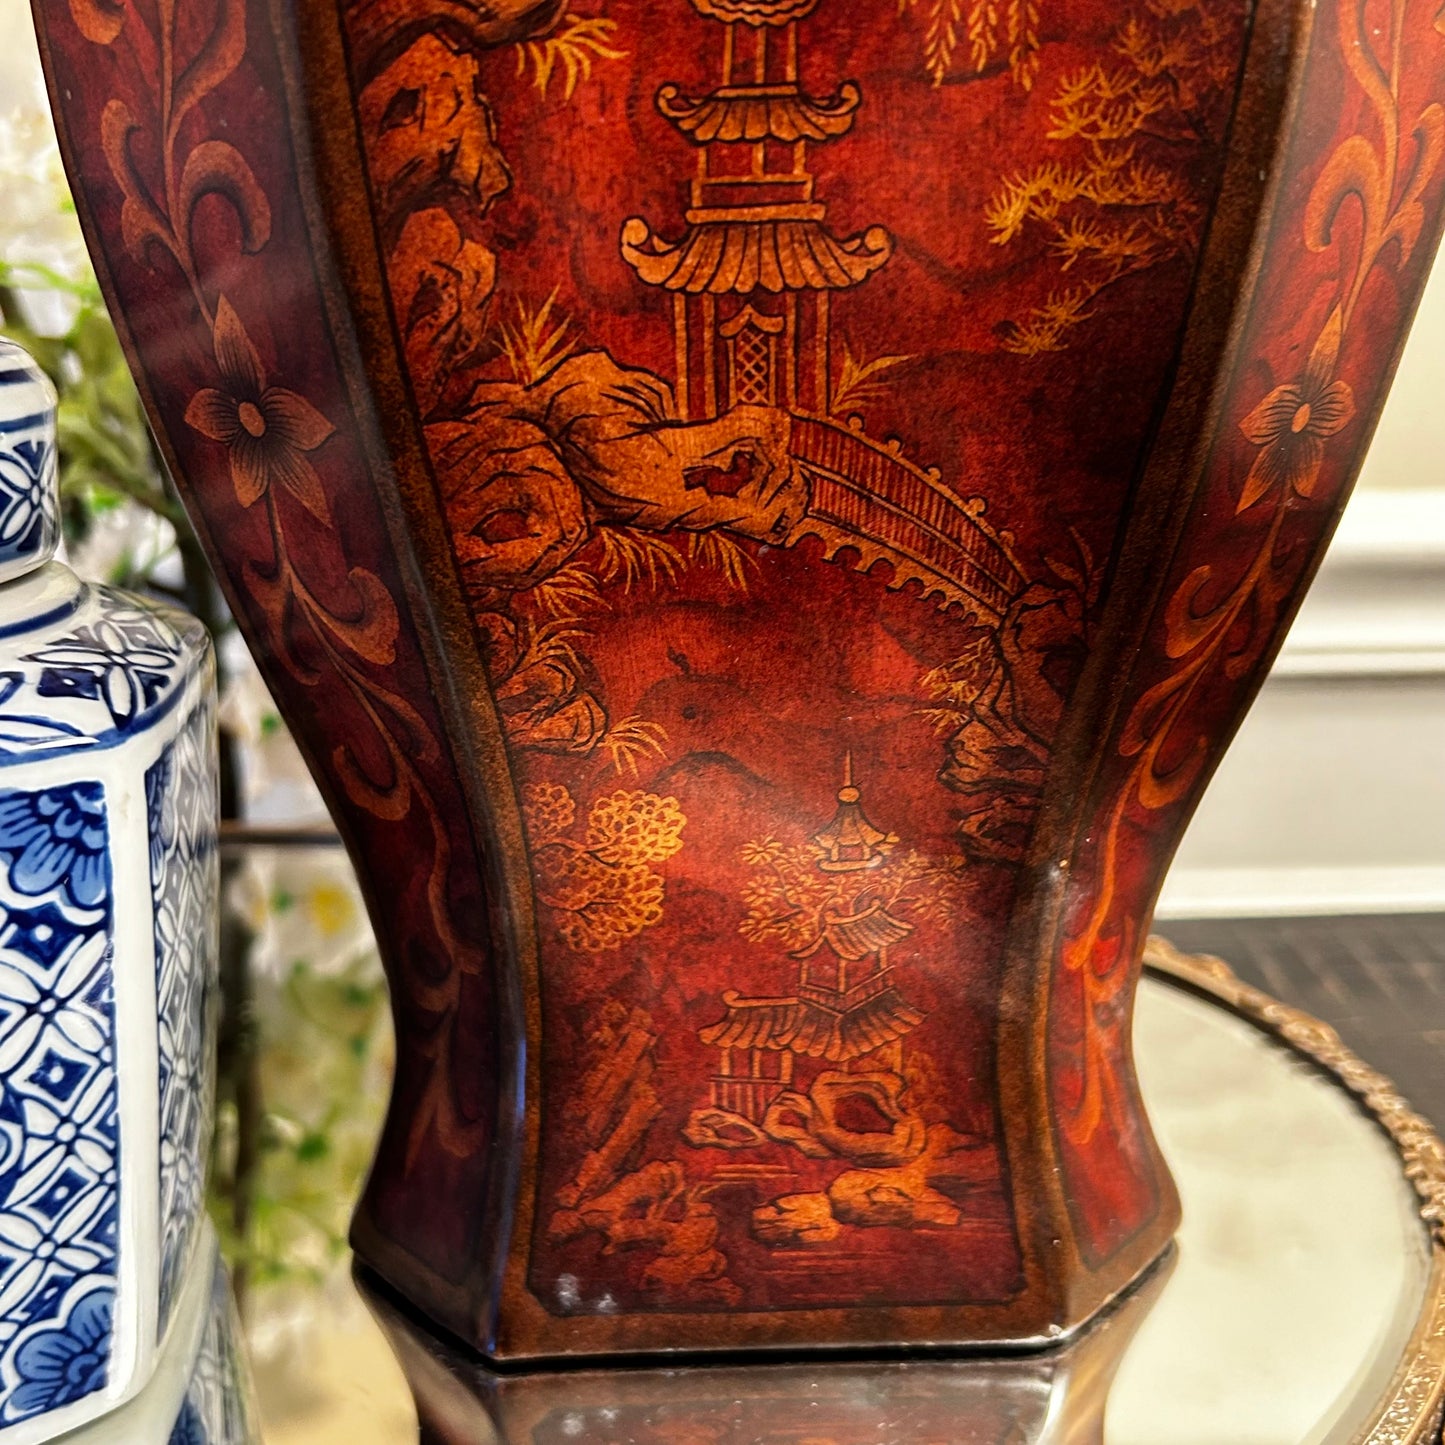 Set of two chinoiserie pagoda statuesque pagoda vases jars plus lids.